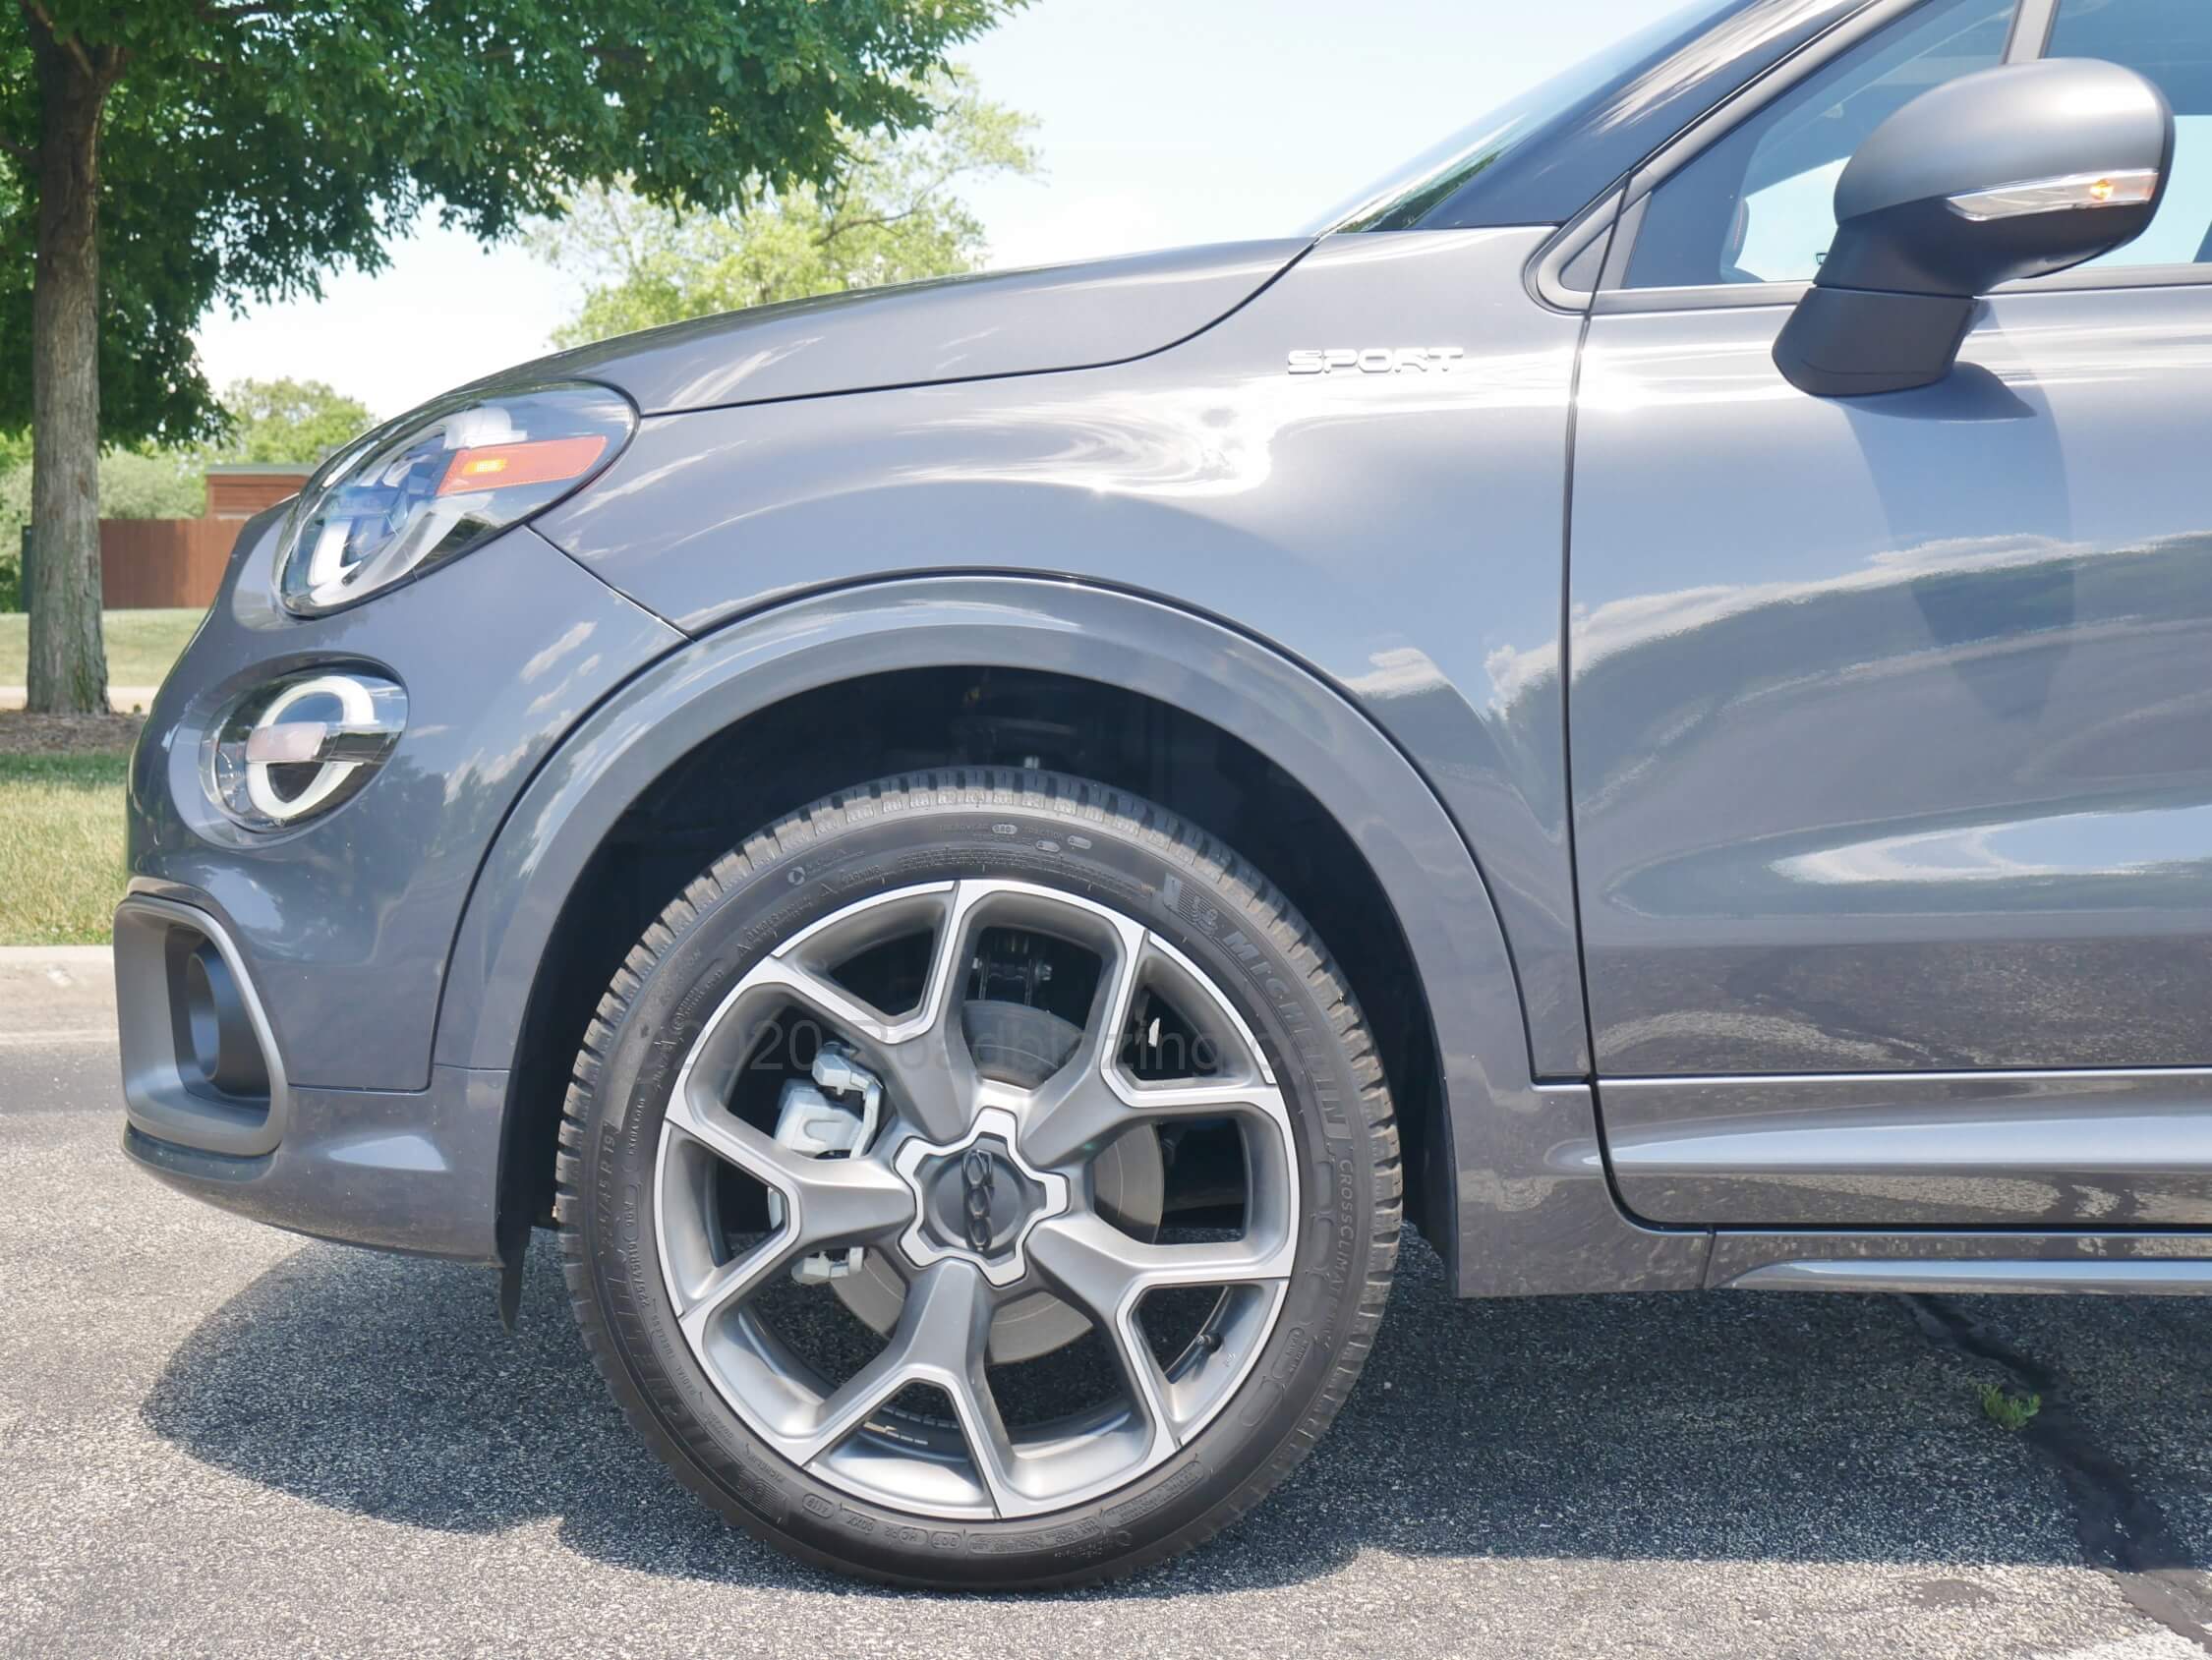 2020 FIAT 500X Sport AWD: 225/45 VR-19 unidirectional Michelin rubber maximizes the Sport nature